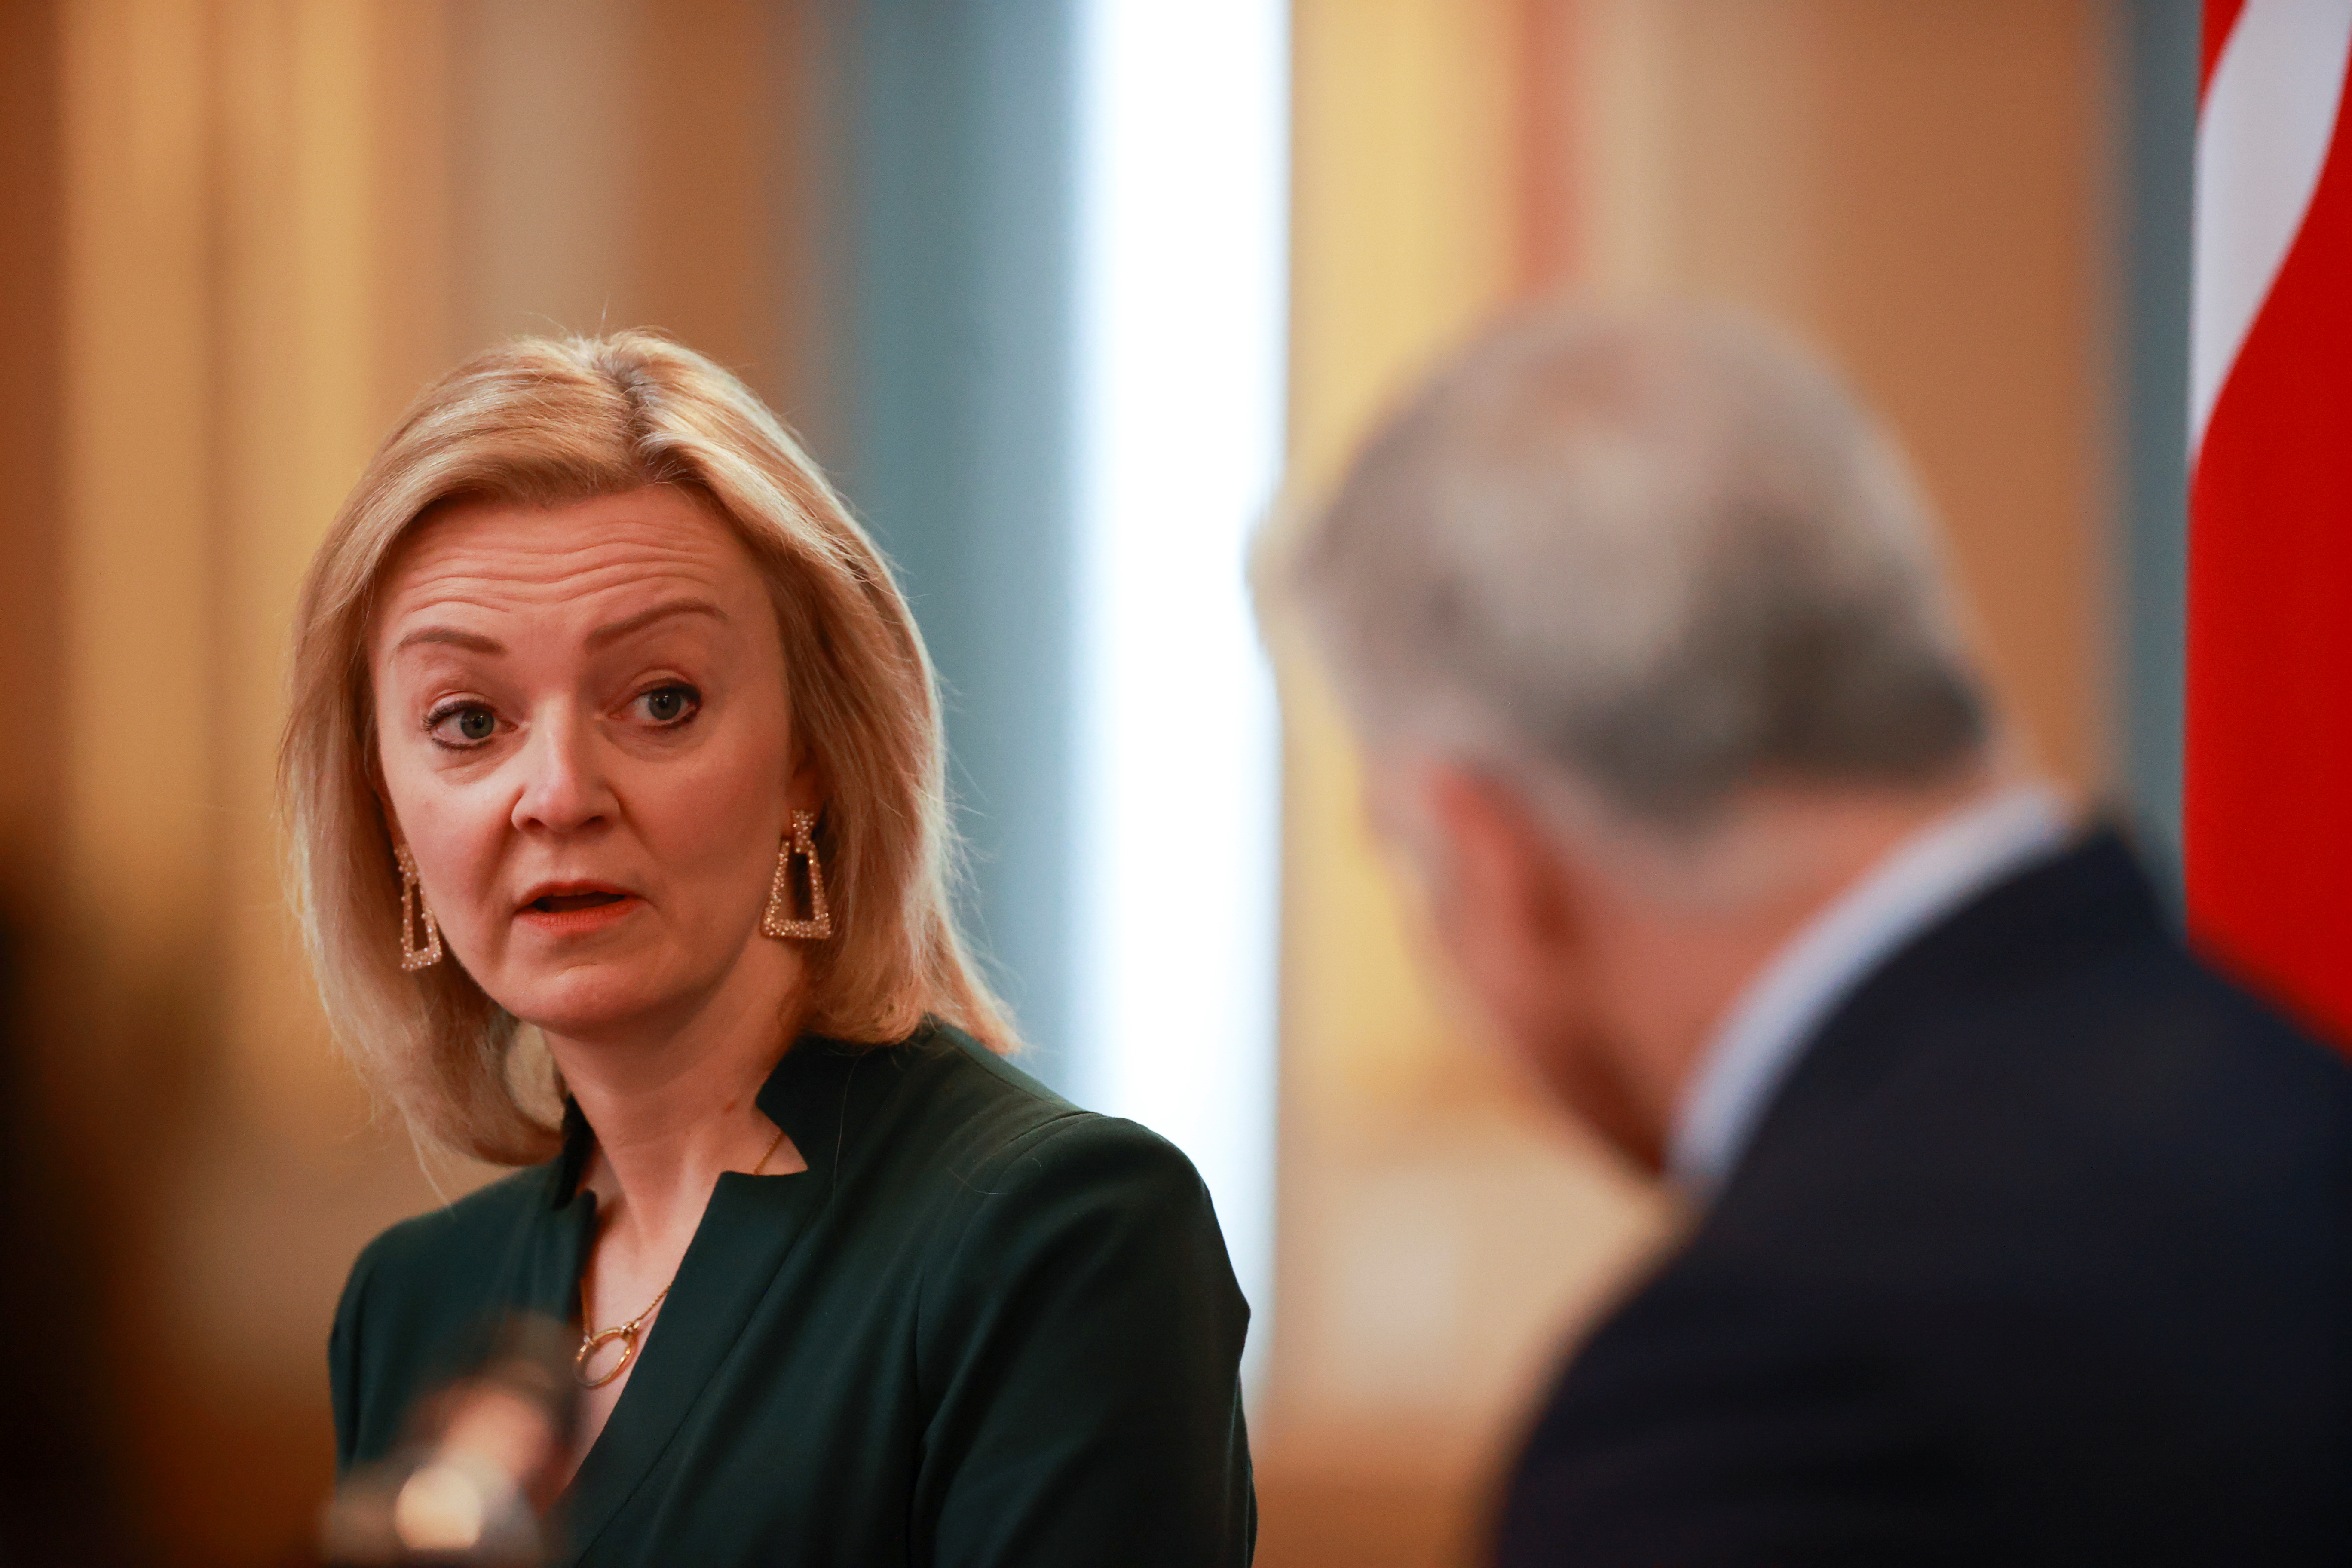 Britain's Foreign Secretary Liz Truss and Israeli Foreign Minister Yair Lapid attend a news conference at the Foreign Commonwealth & Development Office in London, Britain, November 29, 2021. REUTERS/Hannah McKay